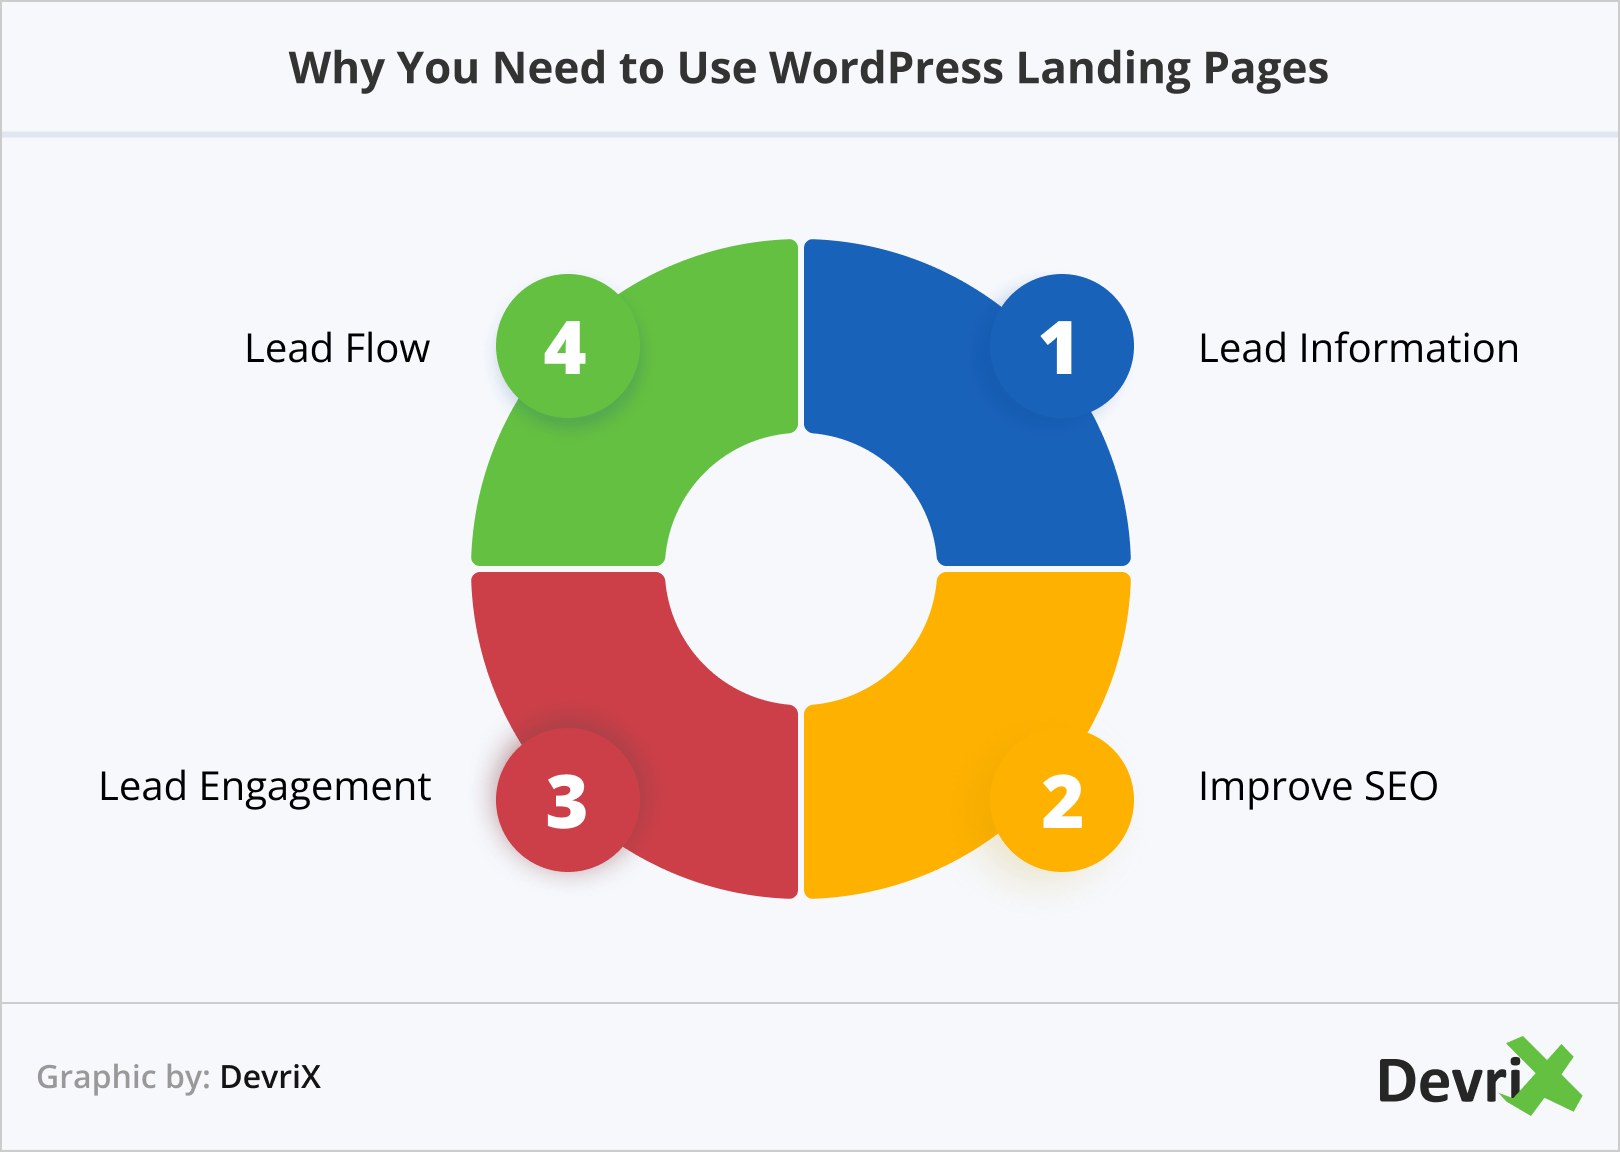 Why You Need to Use WordPress Landing Pages